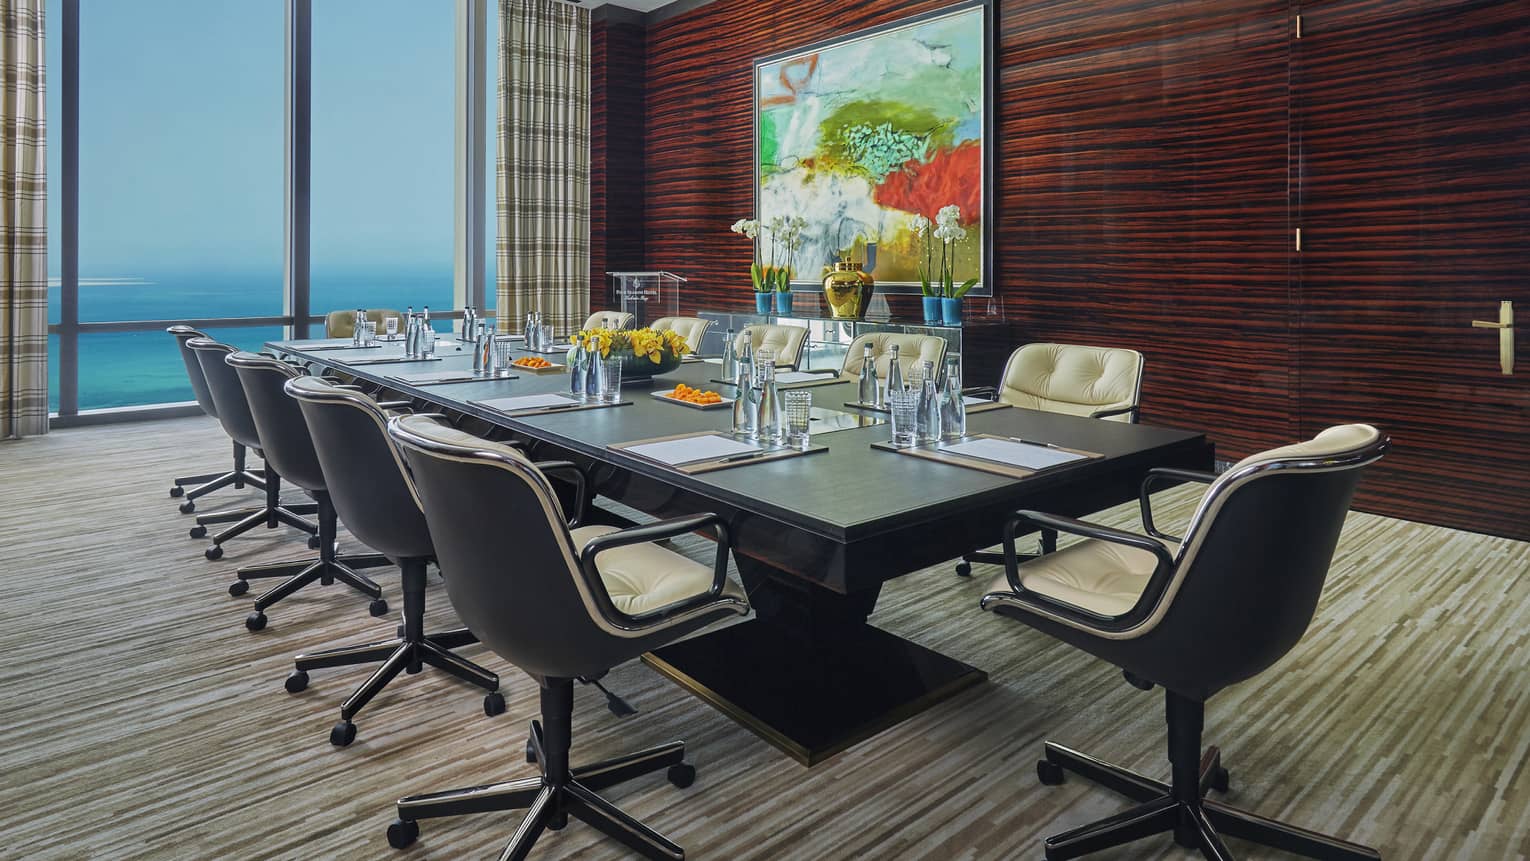 Boardroom meeting table lined with swivel chairs by wood wall with large painting, window